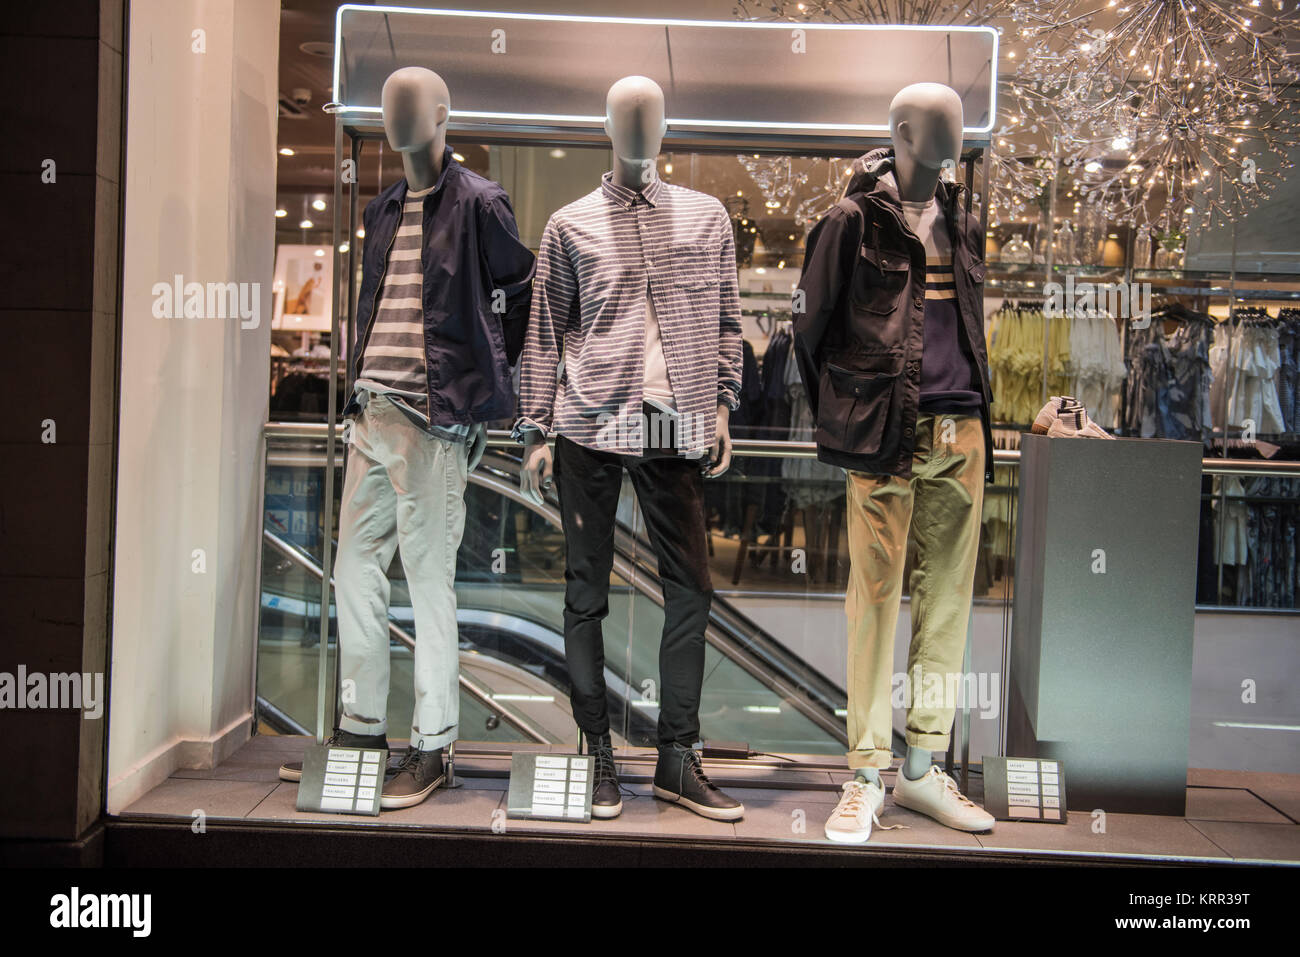 Clothing store with mannequins Stock Photo